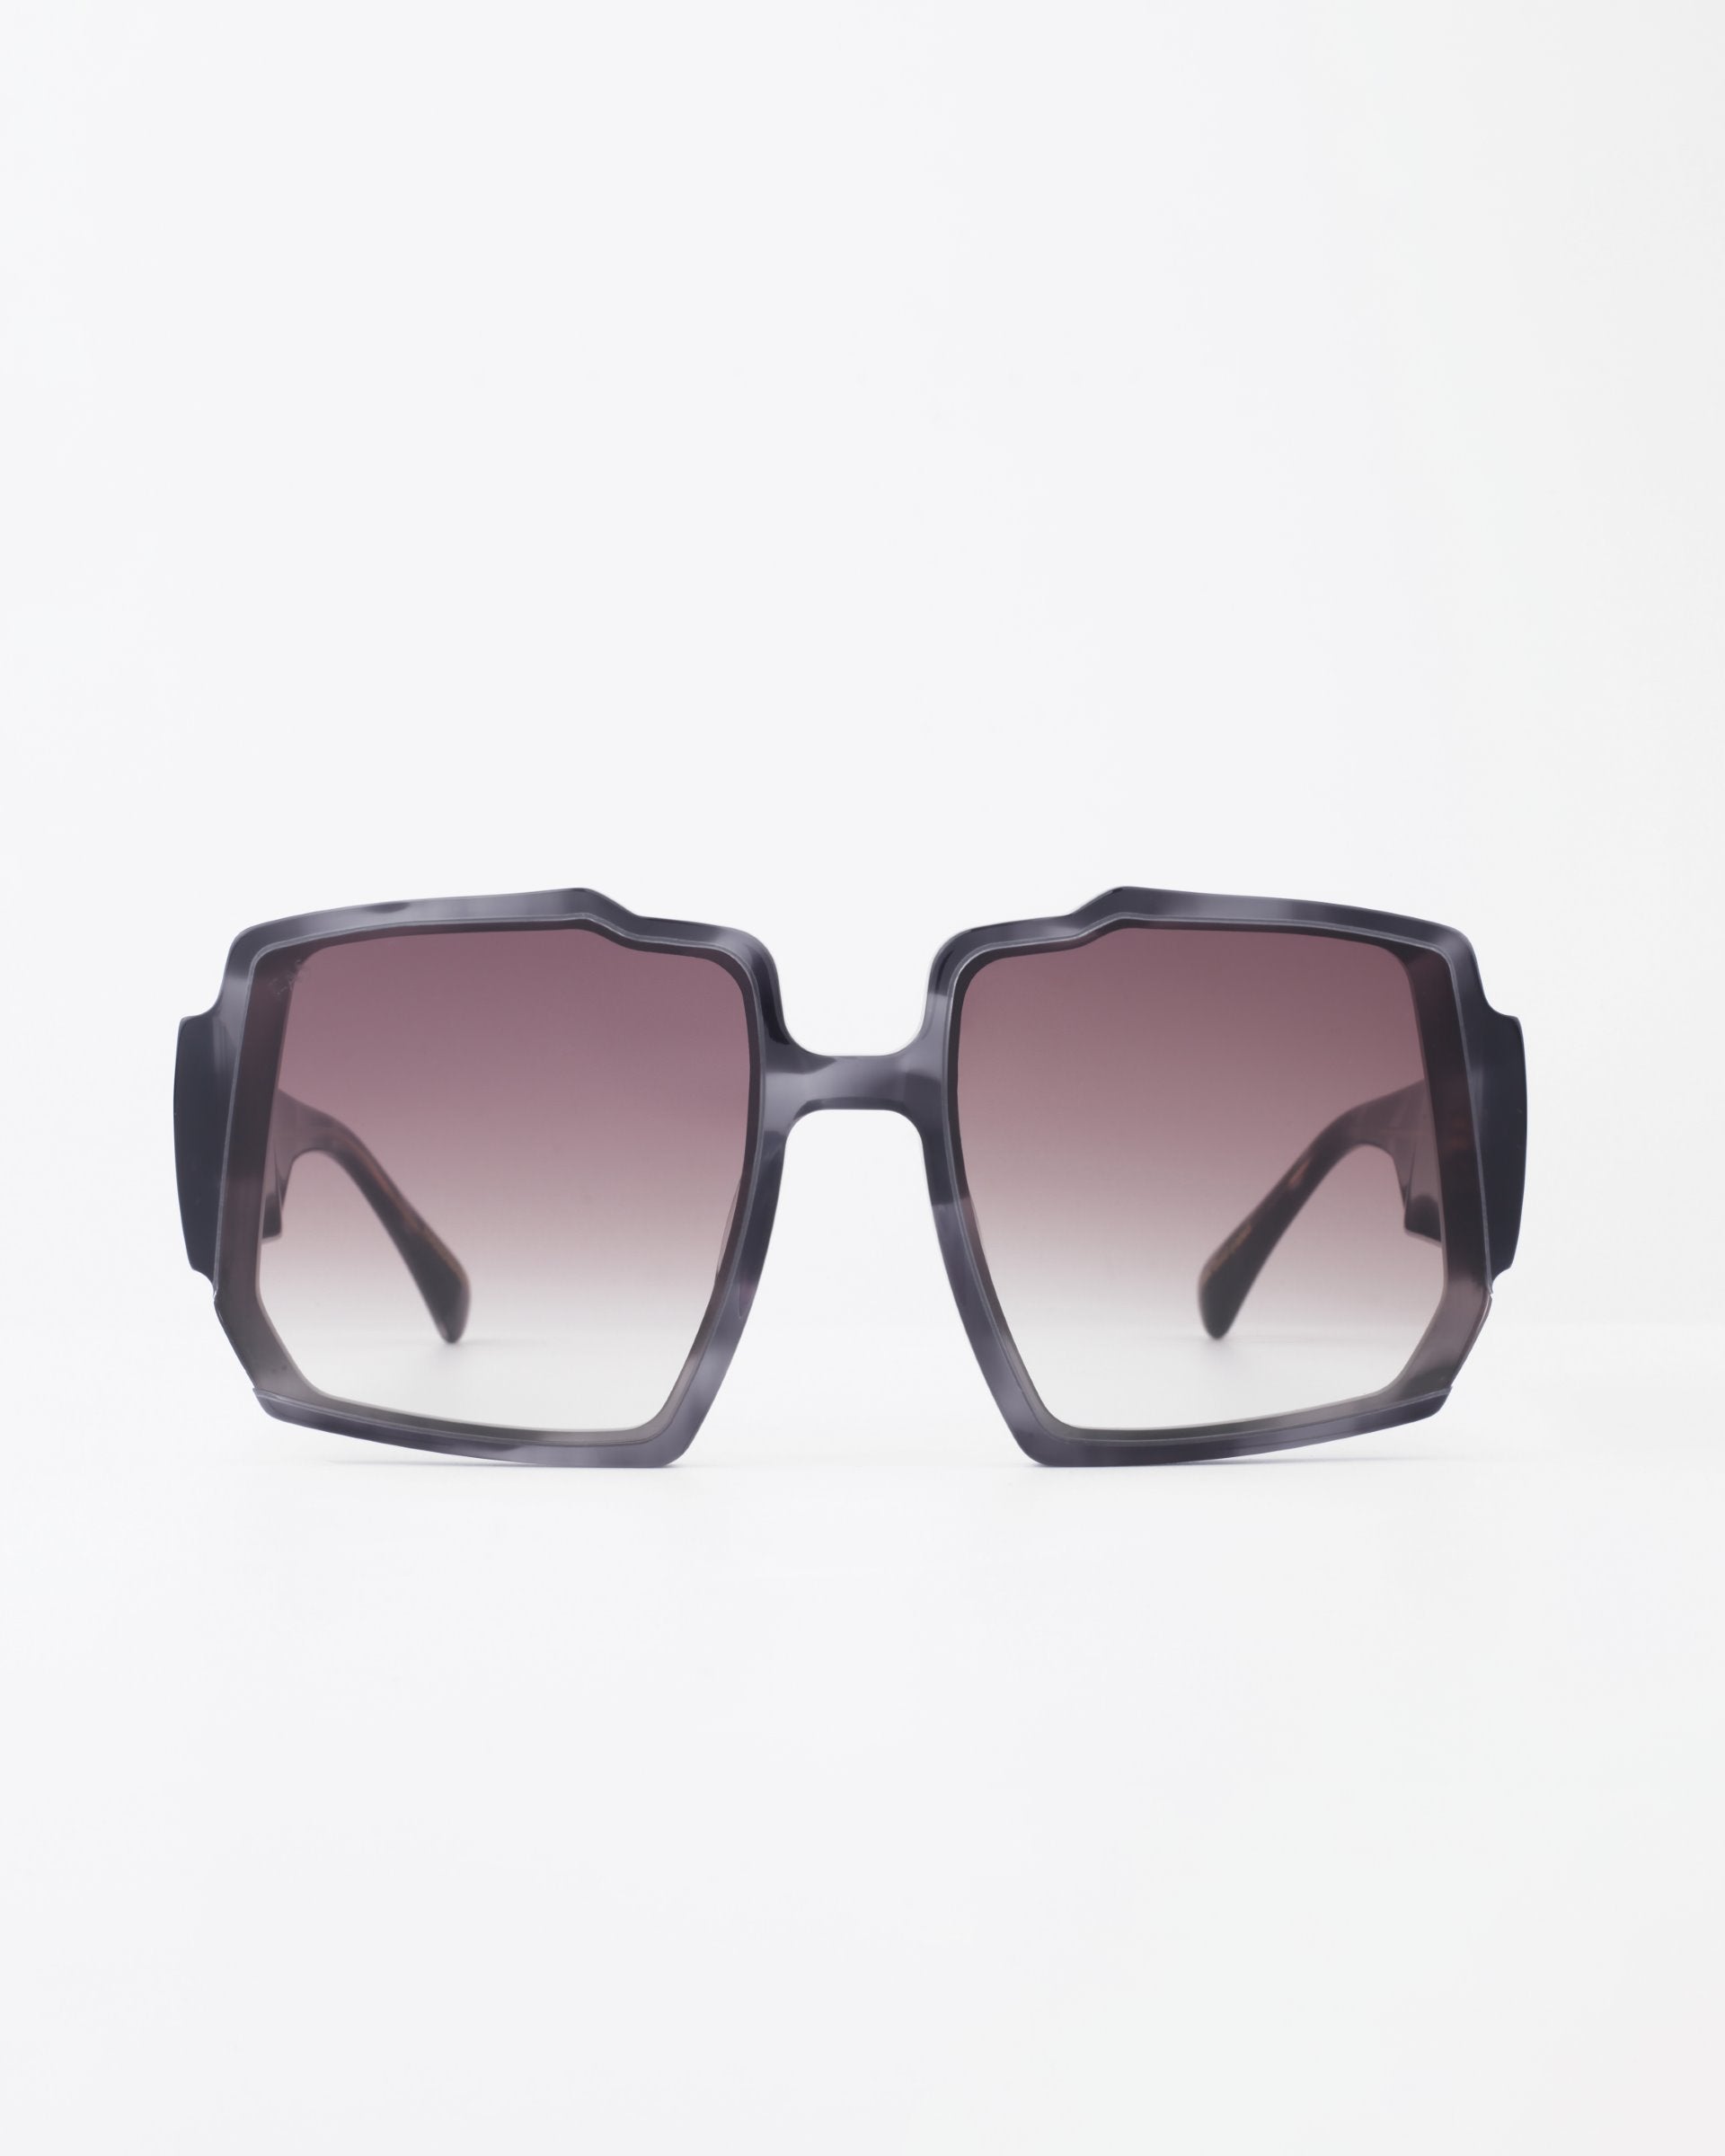 A pair of large, square-framed sunglasses with a dark gradient tint, featuring thick black rims and broad temples. The bold, modern design of the Moritz by For Art's Sake® is enhanced by UV-protected lenses and photographed against a plain white background to highlight their chunky acetate frame.